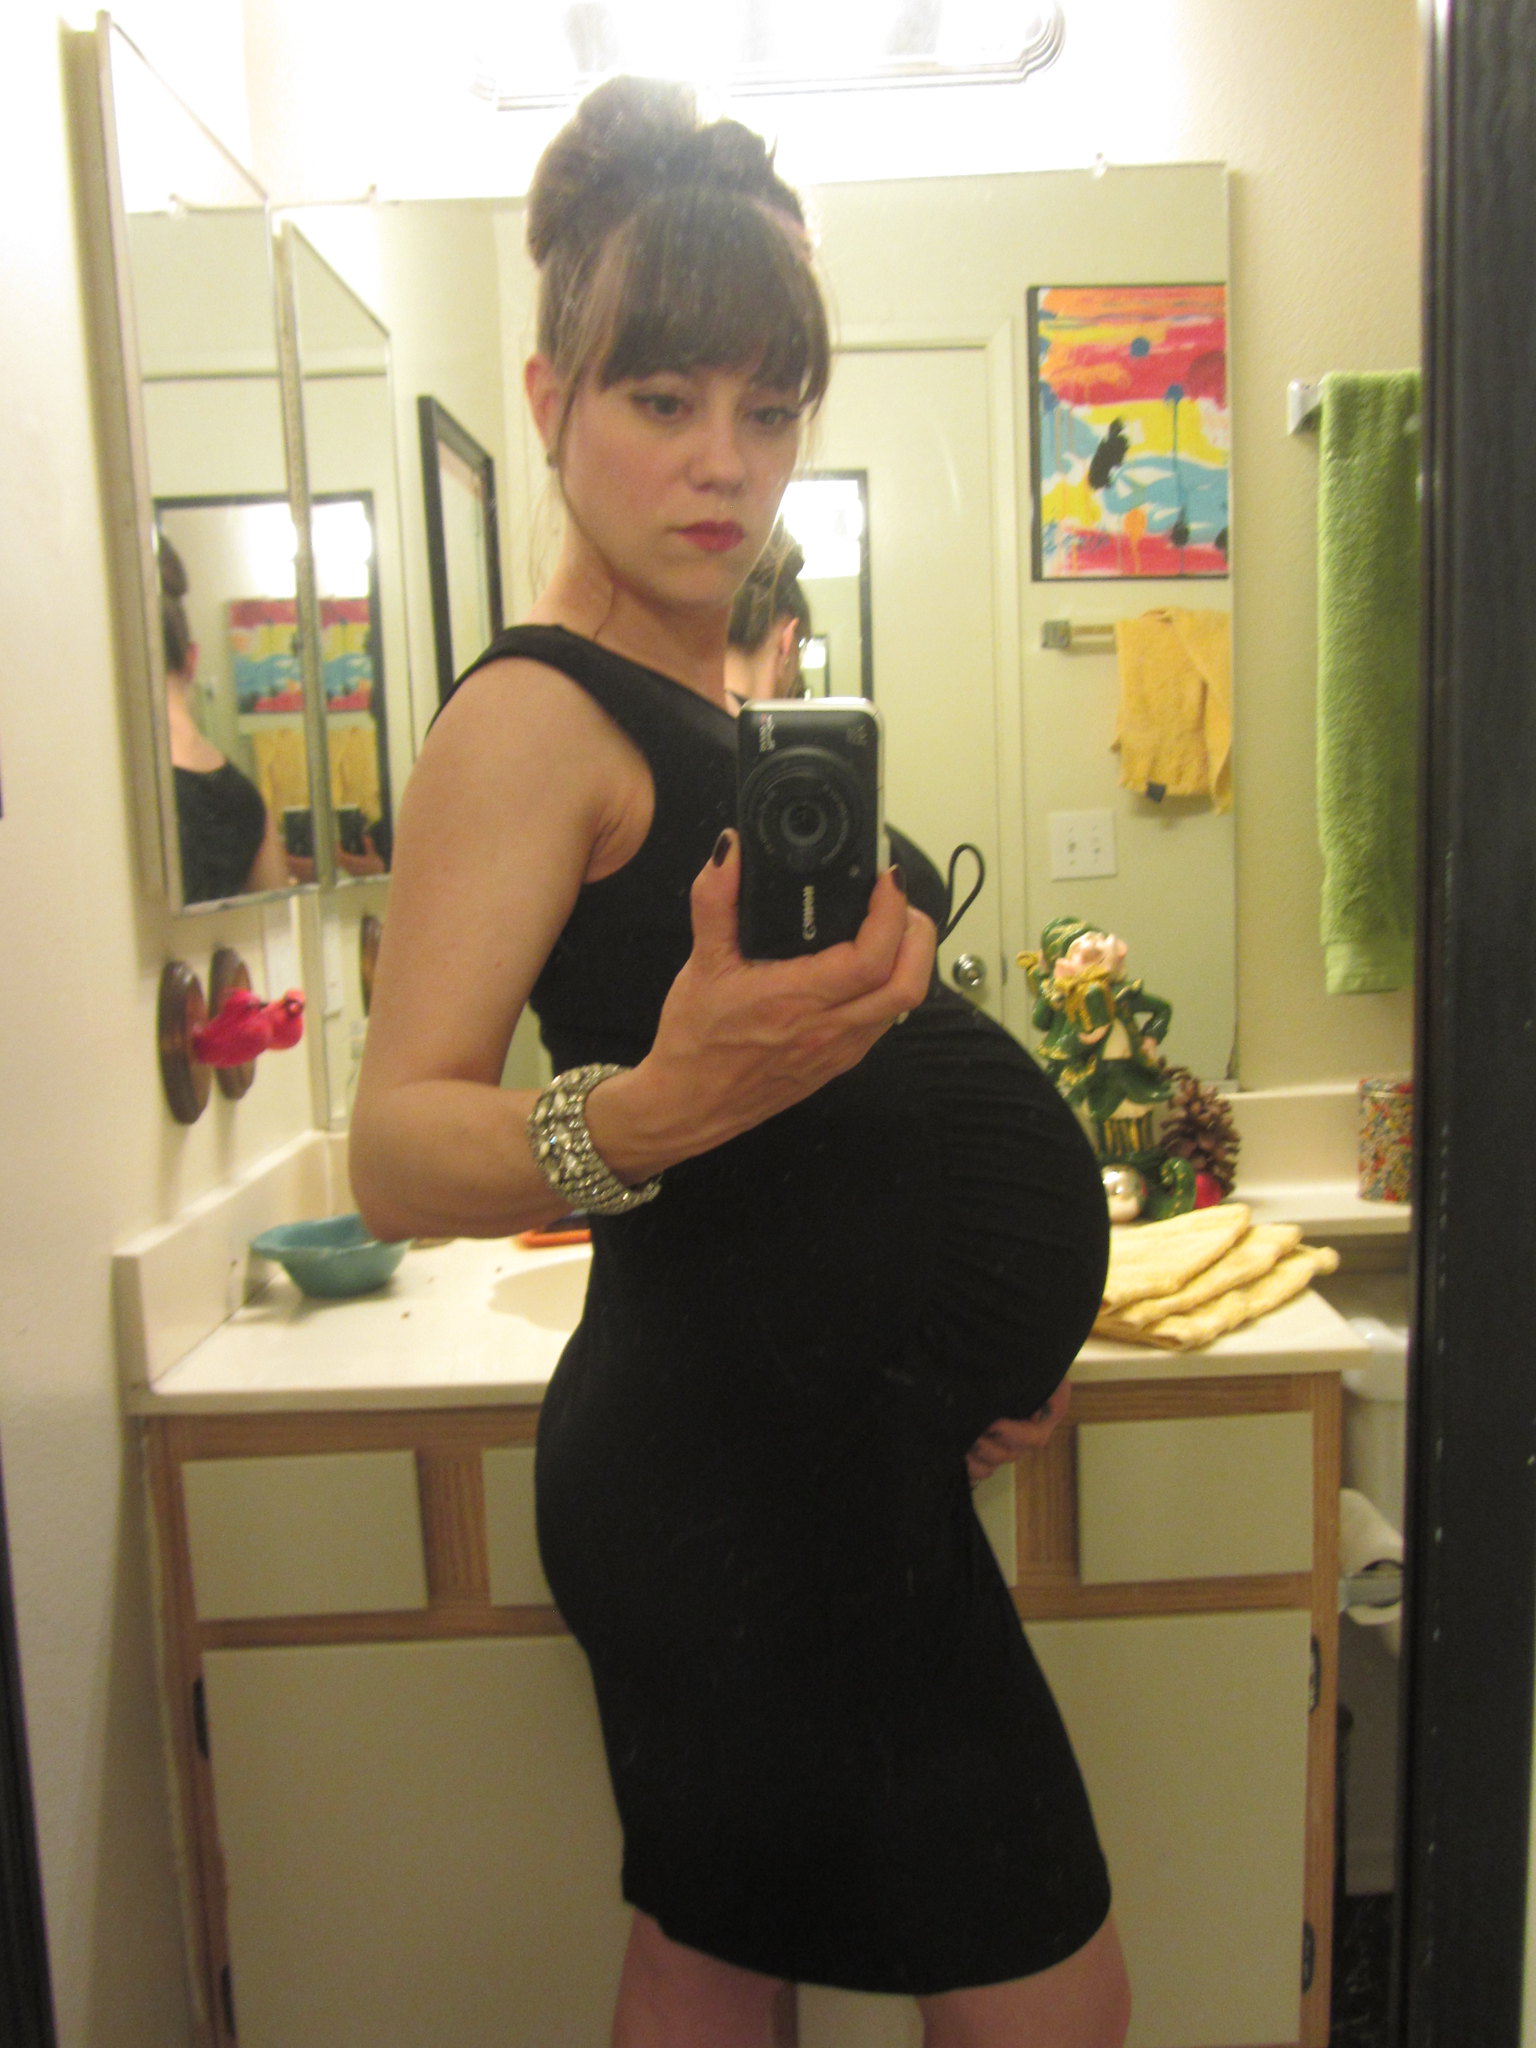 A pregnant woman taking a selfie | Source: Flickr